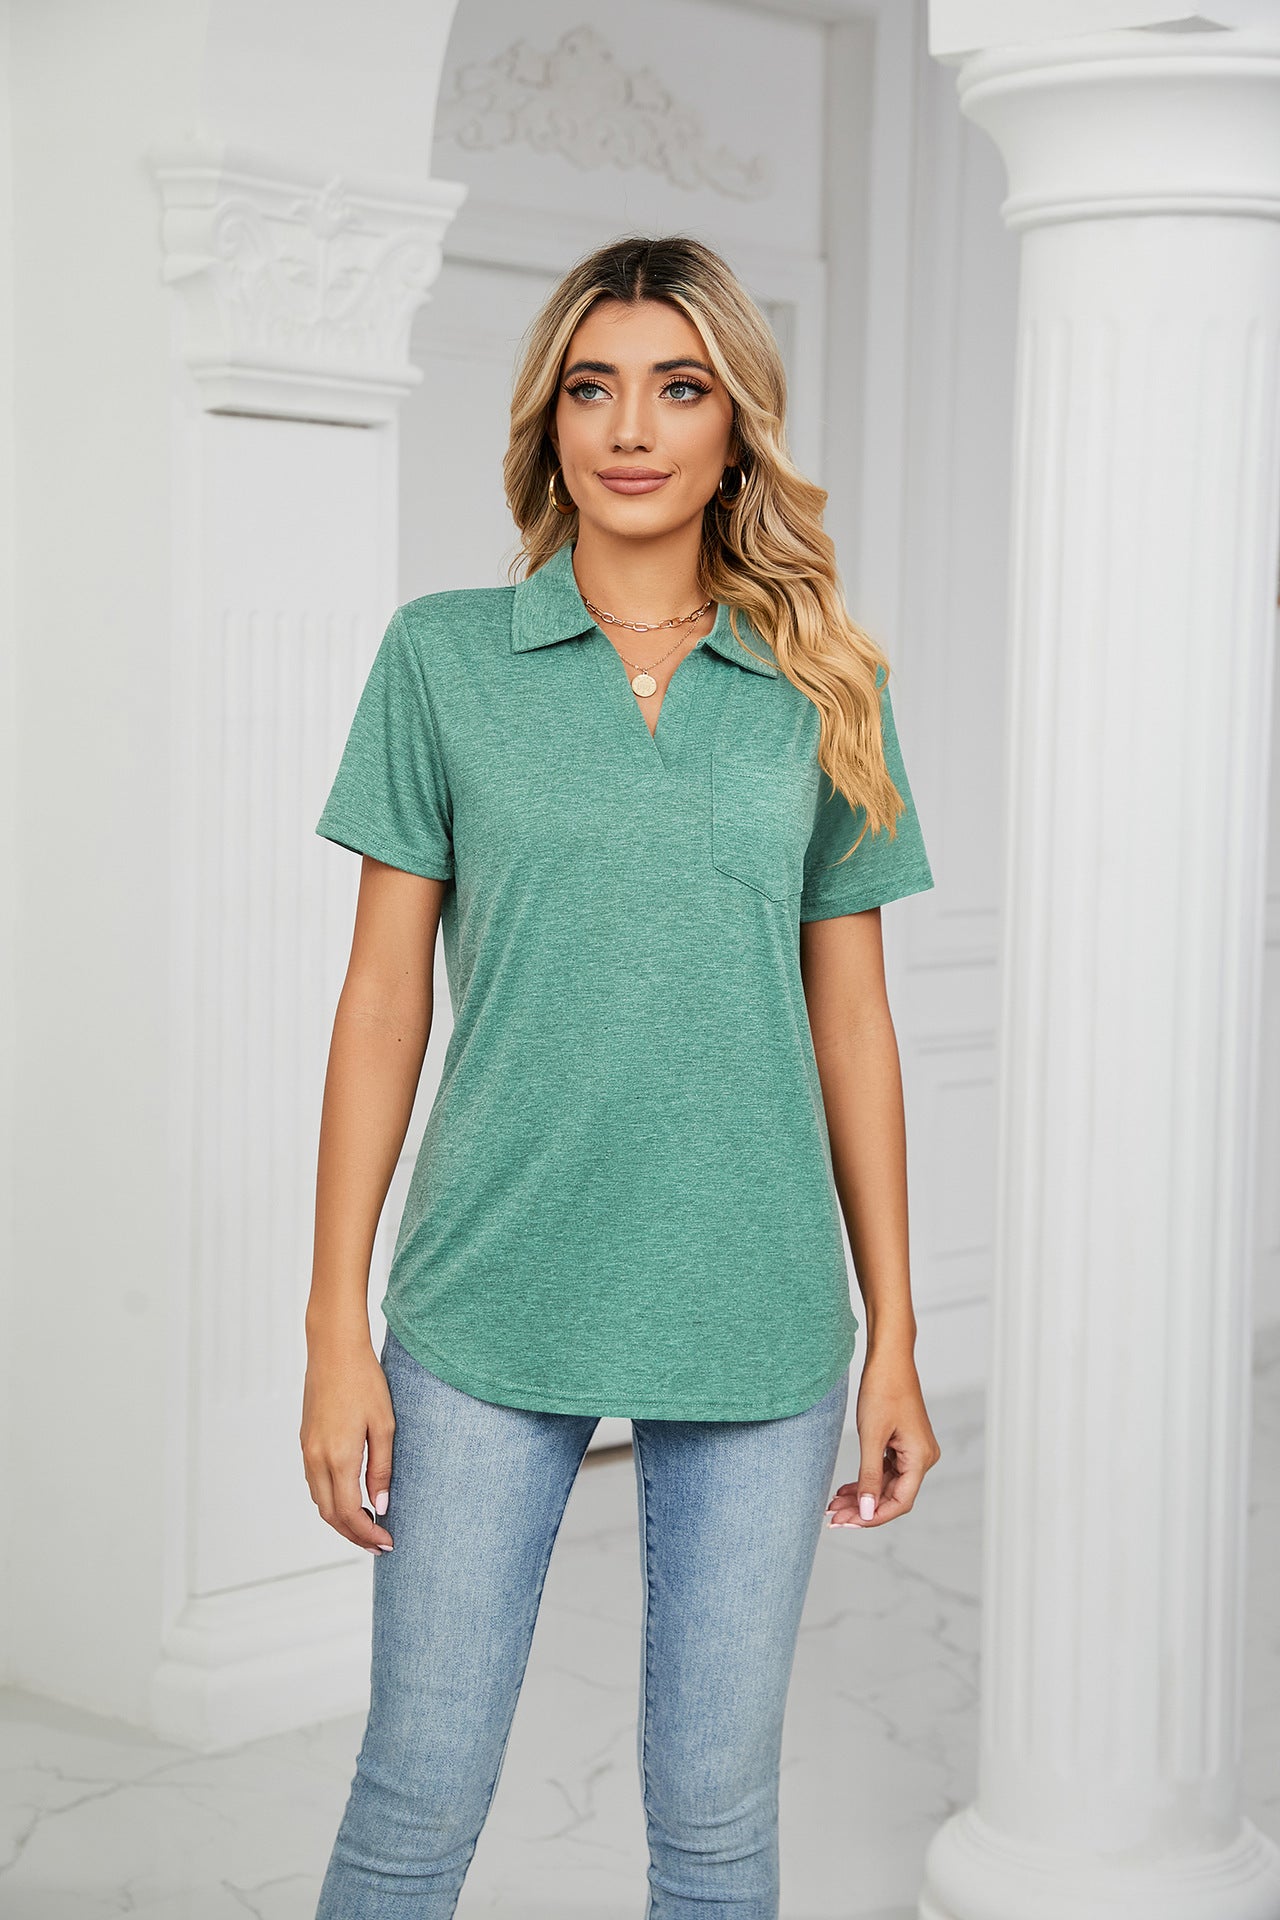 Solid Color Short Sleeve Collared Pocket Loose Fitting T shirt Top